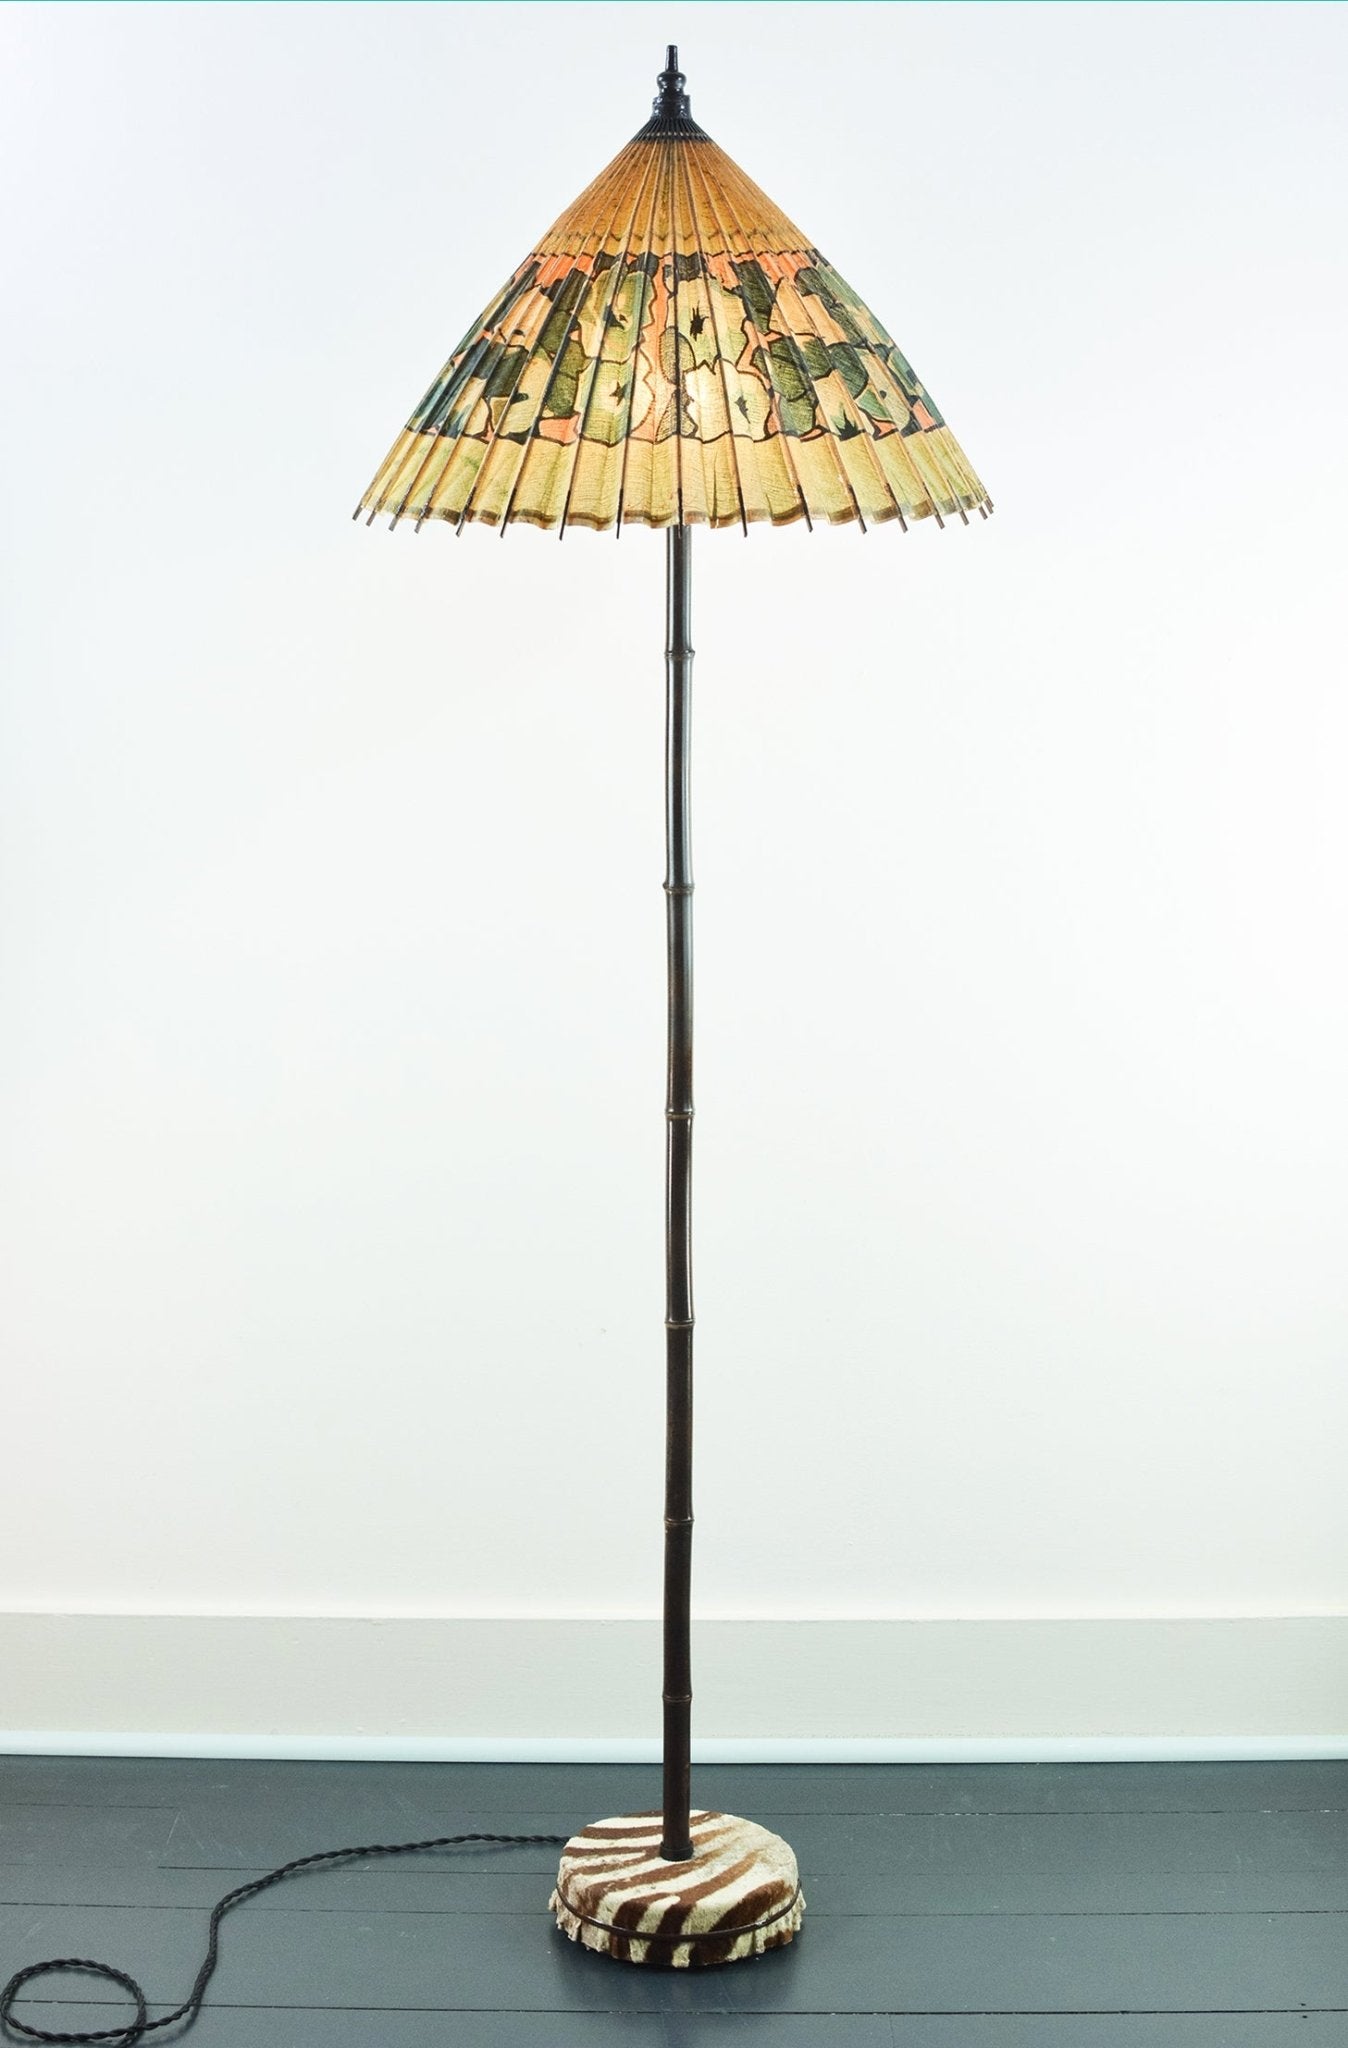 'Zebra Lamp' in Black Bamboo with French Deco Parasol Shade and Vintage Hide-Covered Base — Model No. 013 - Tennant New York